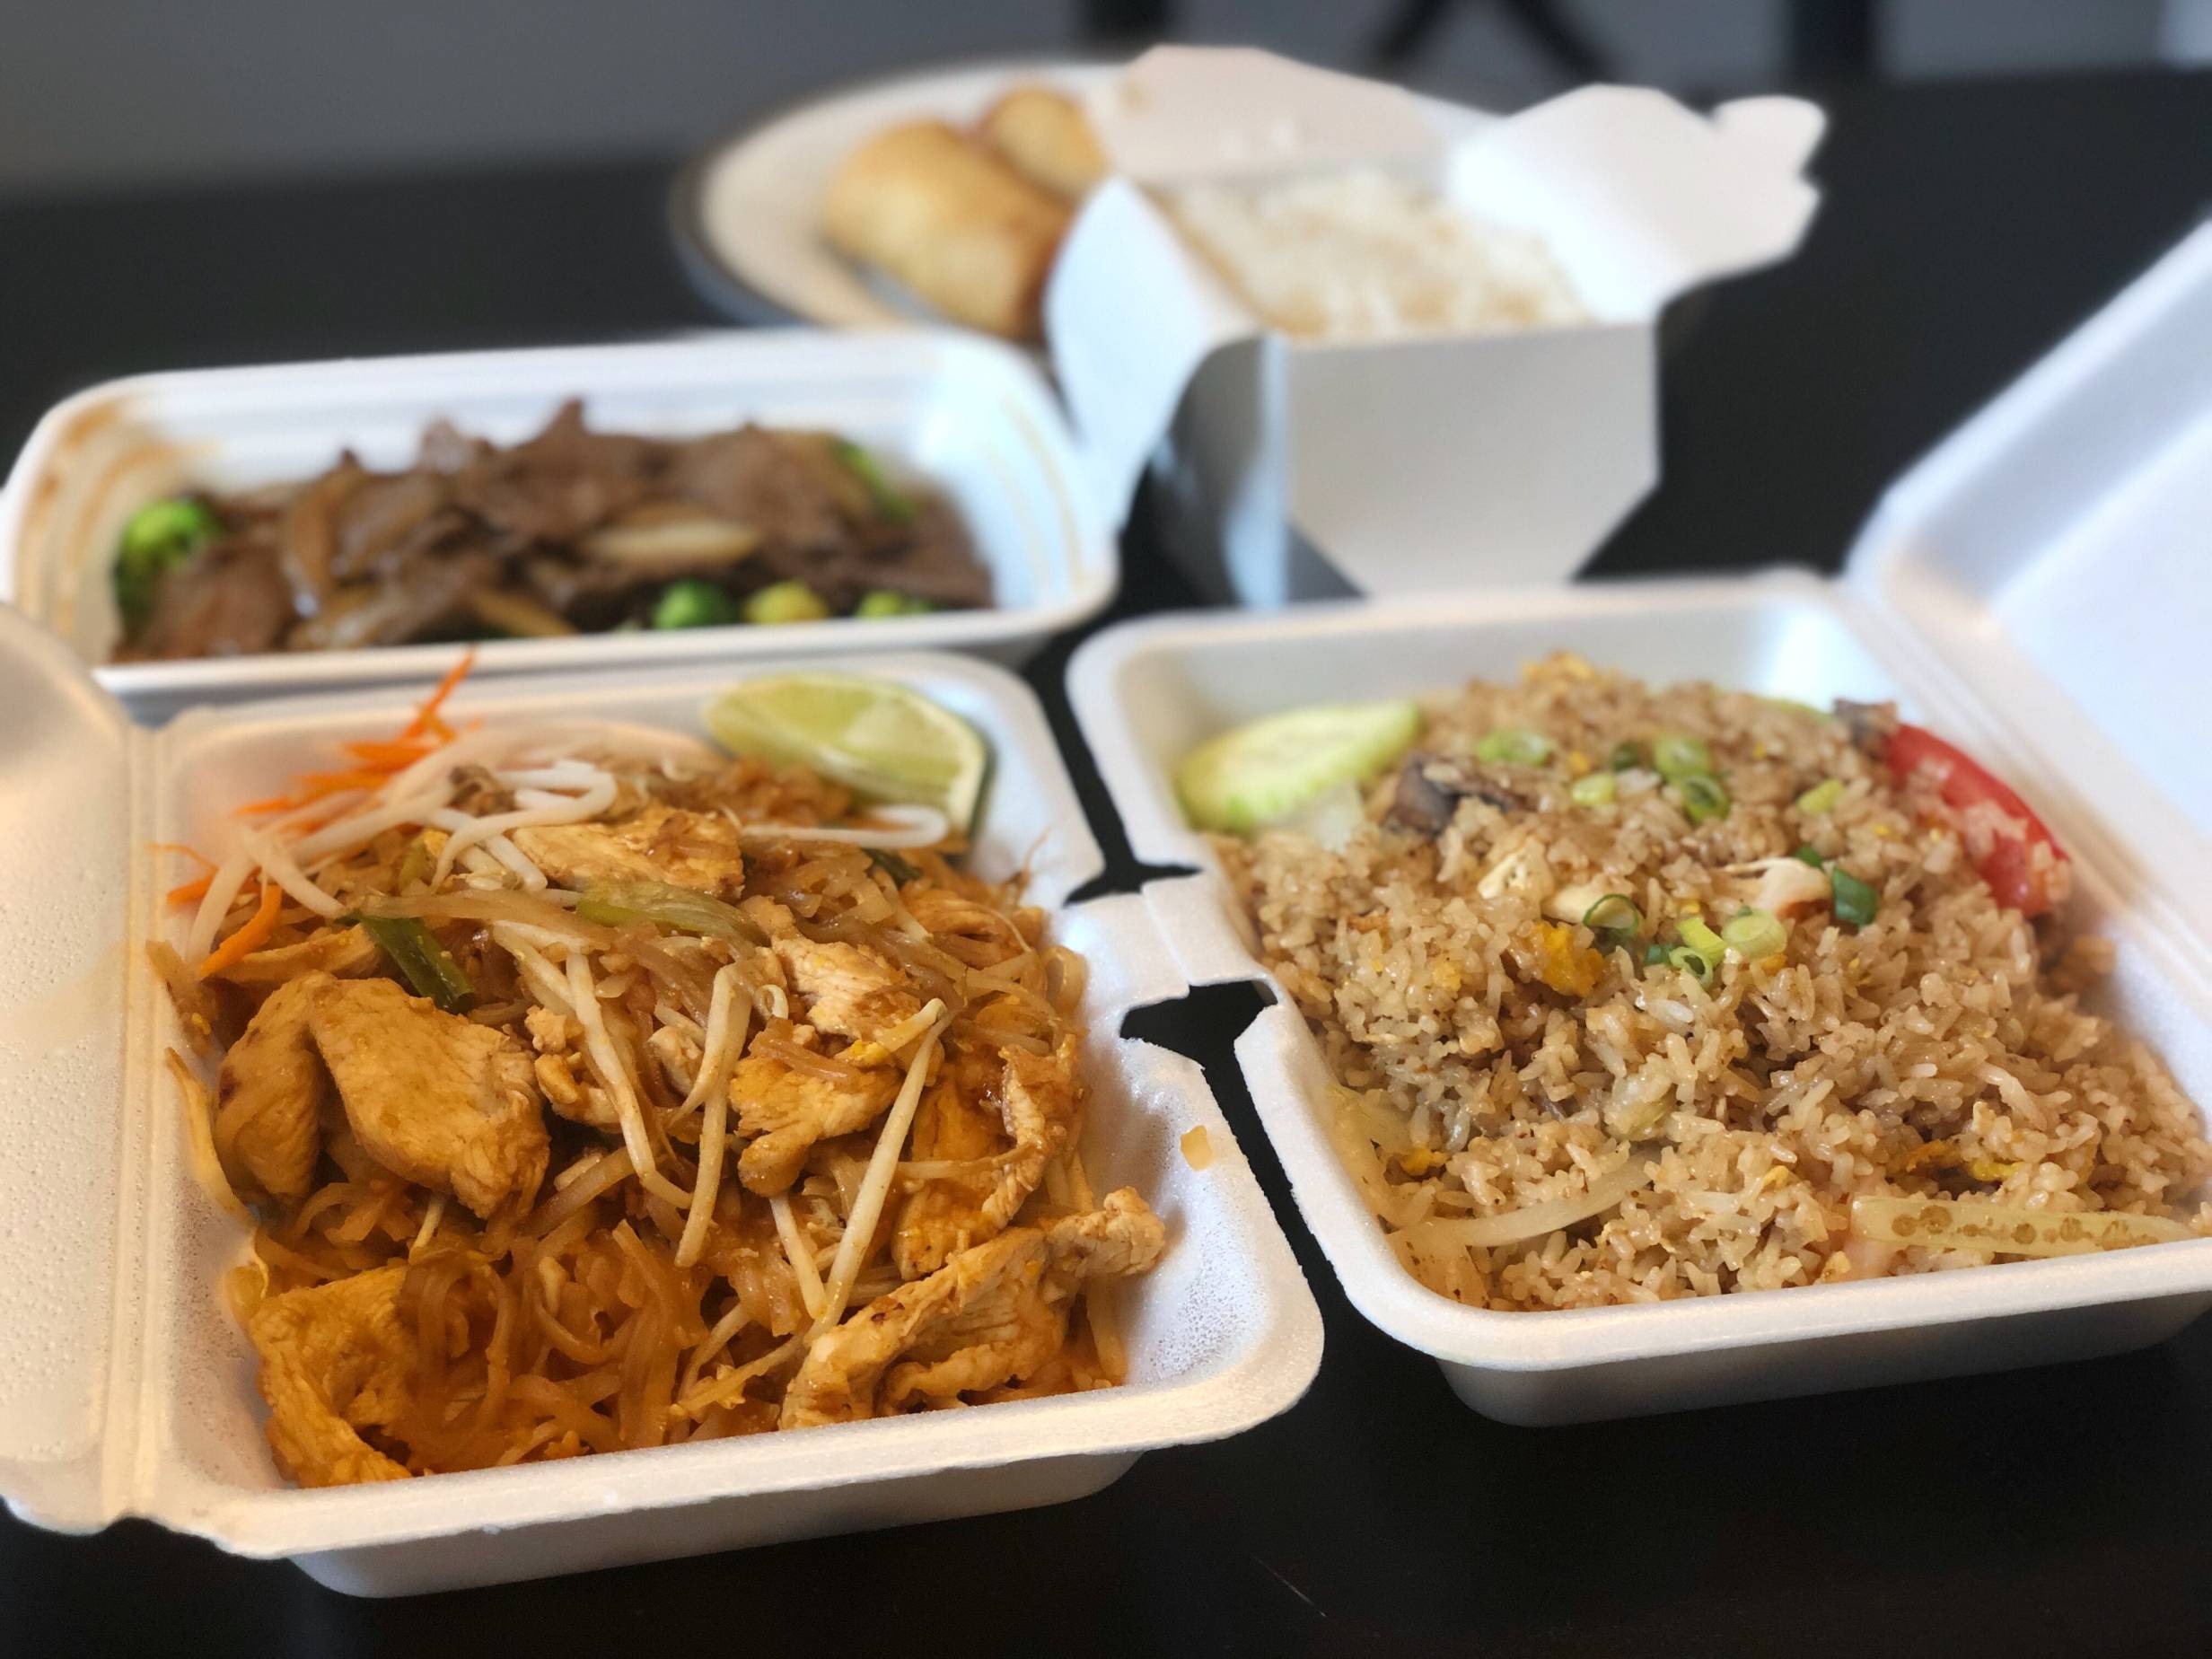 Siam Terrace satisfies Thai cravings with delish takeout and abundant menu options